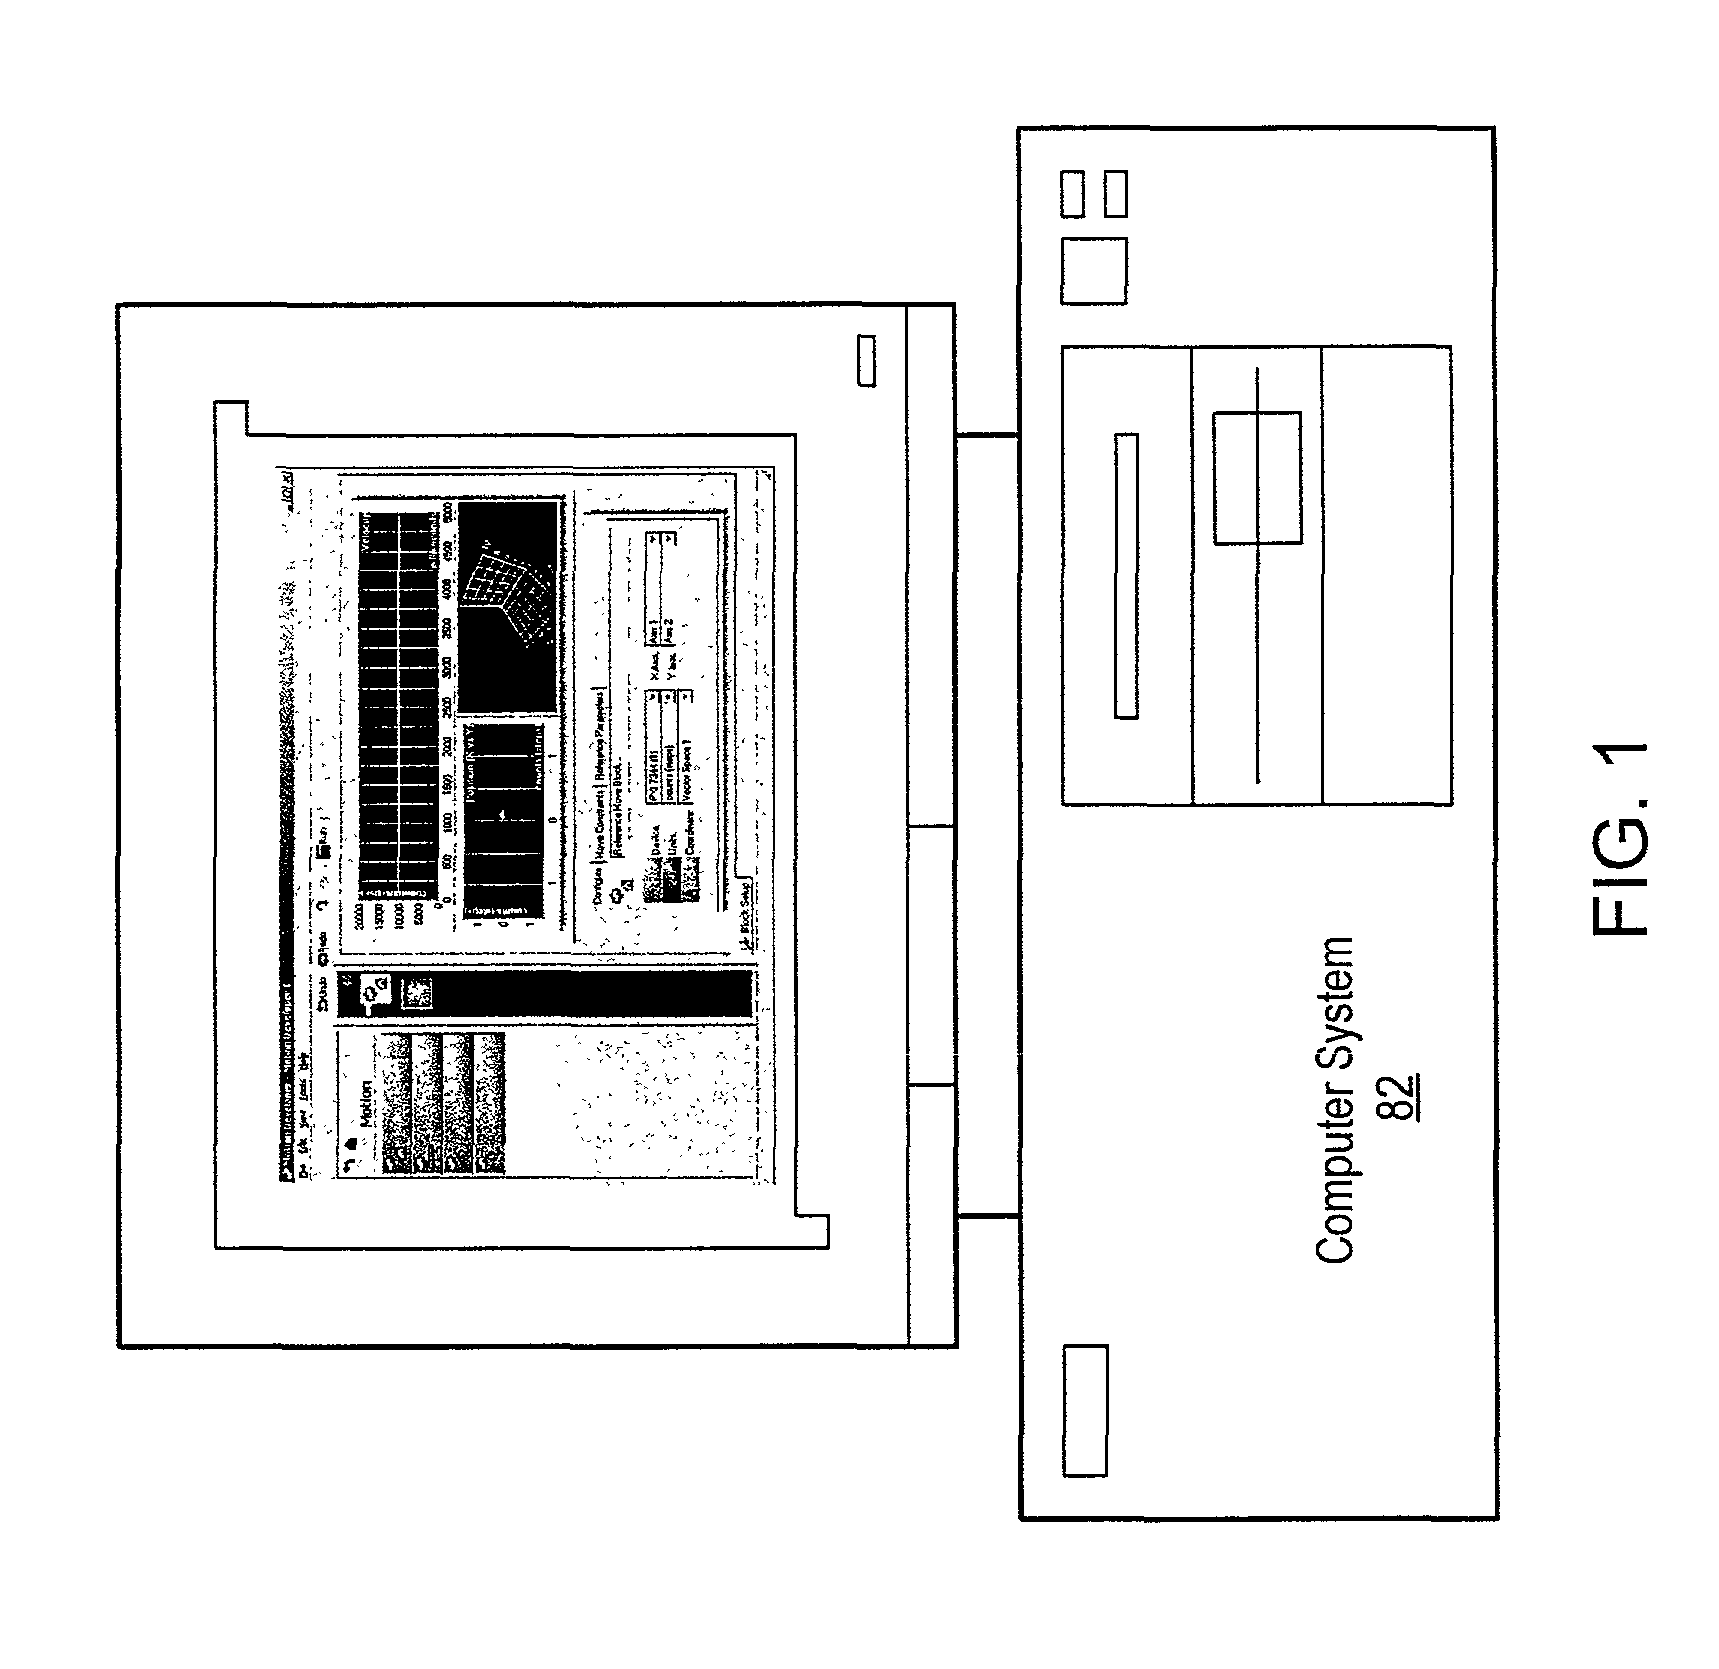 System and method for programmatically generating a graphical program based on a sequence of motion control, machine vision, and data acquisition (DAQ) operations